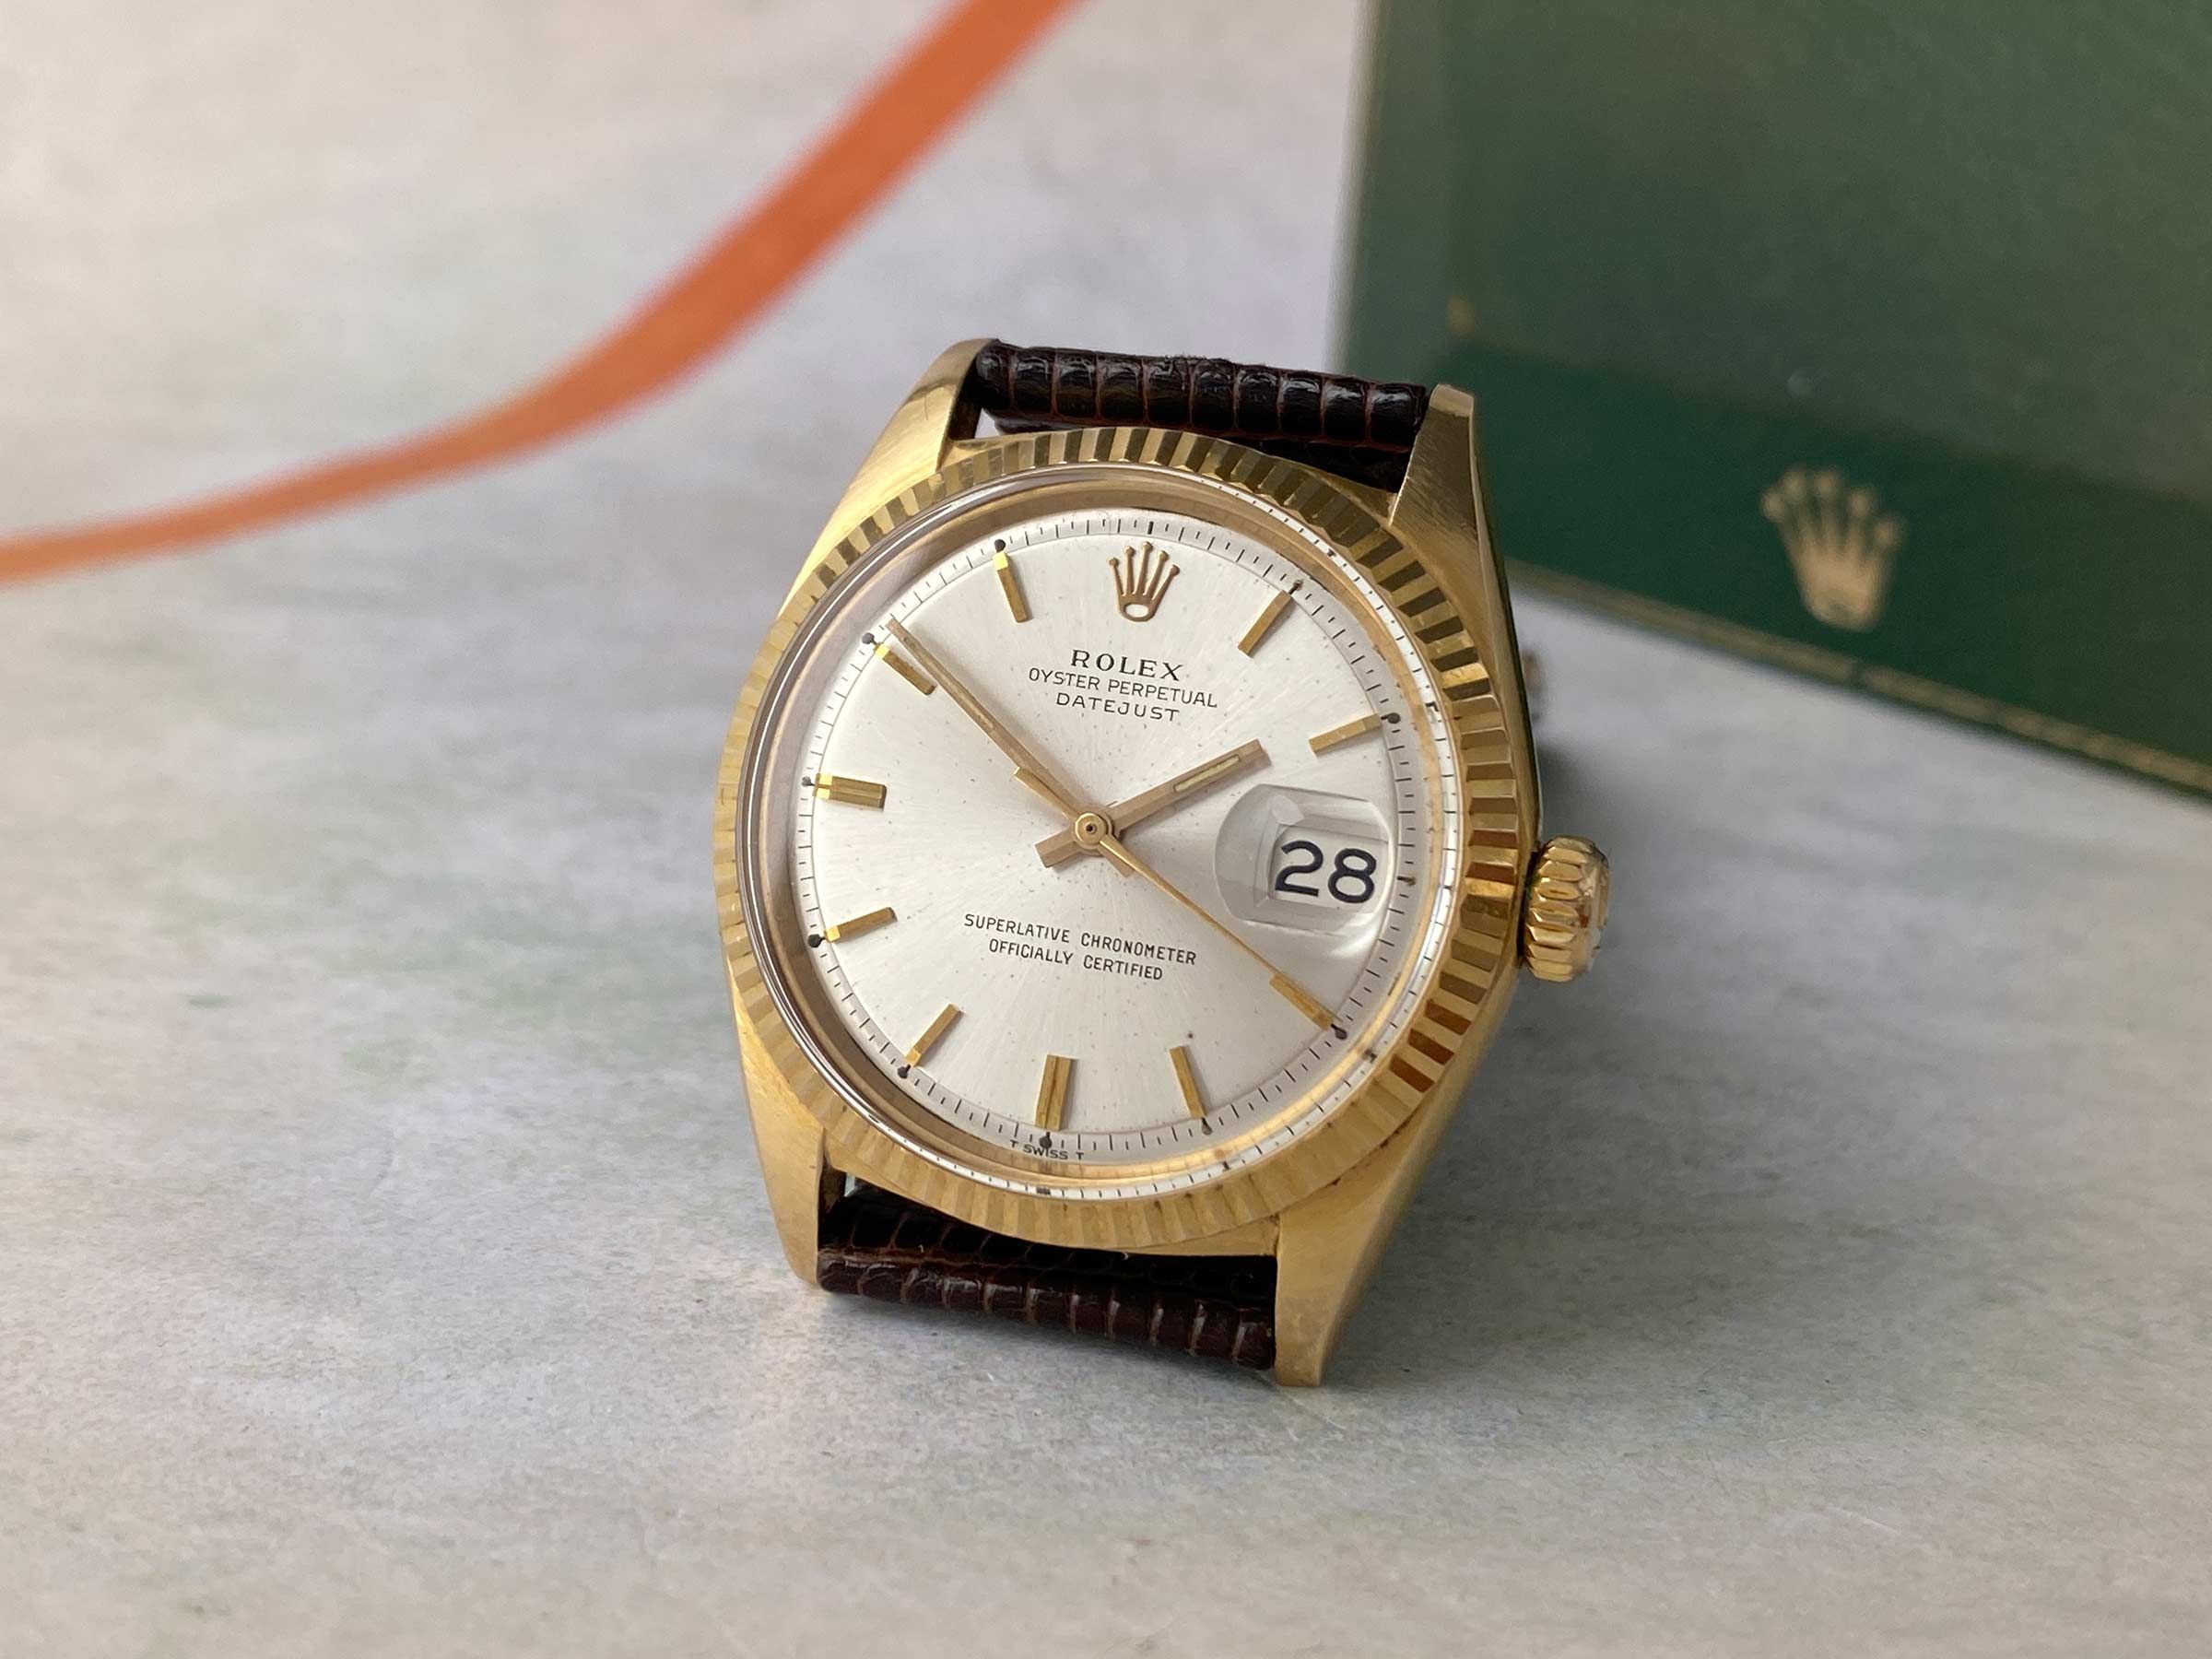 Gold Rolex Oyster Perpetual Datejust Chronometer Ref. 1600 vintage